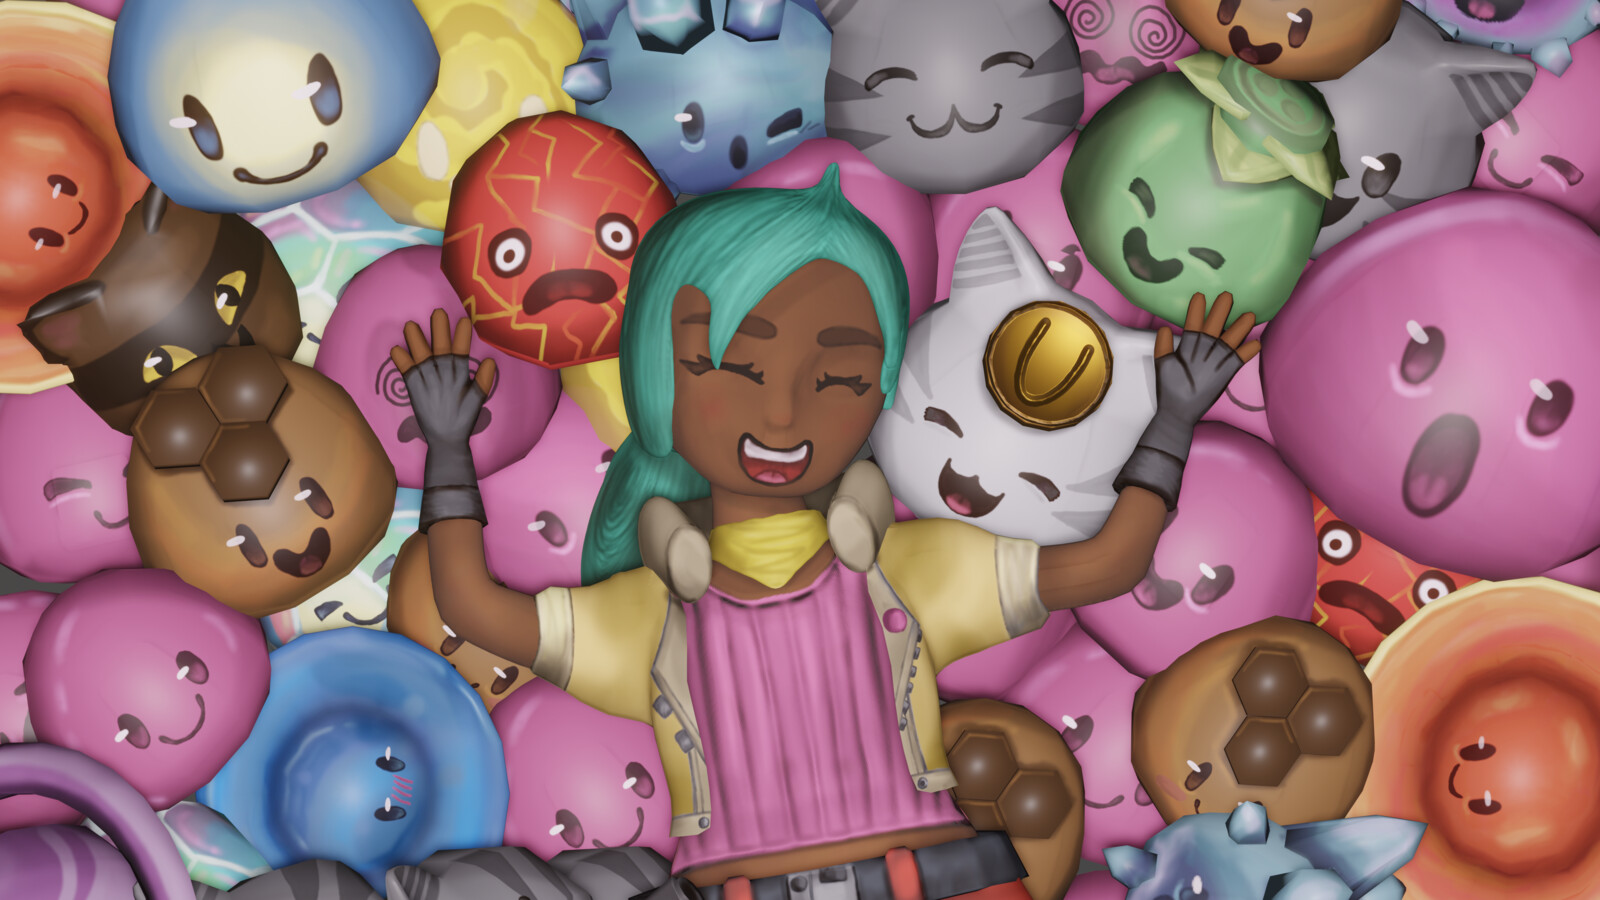 A close-up of Beatrix and the slimes around her.